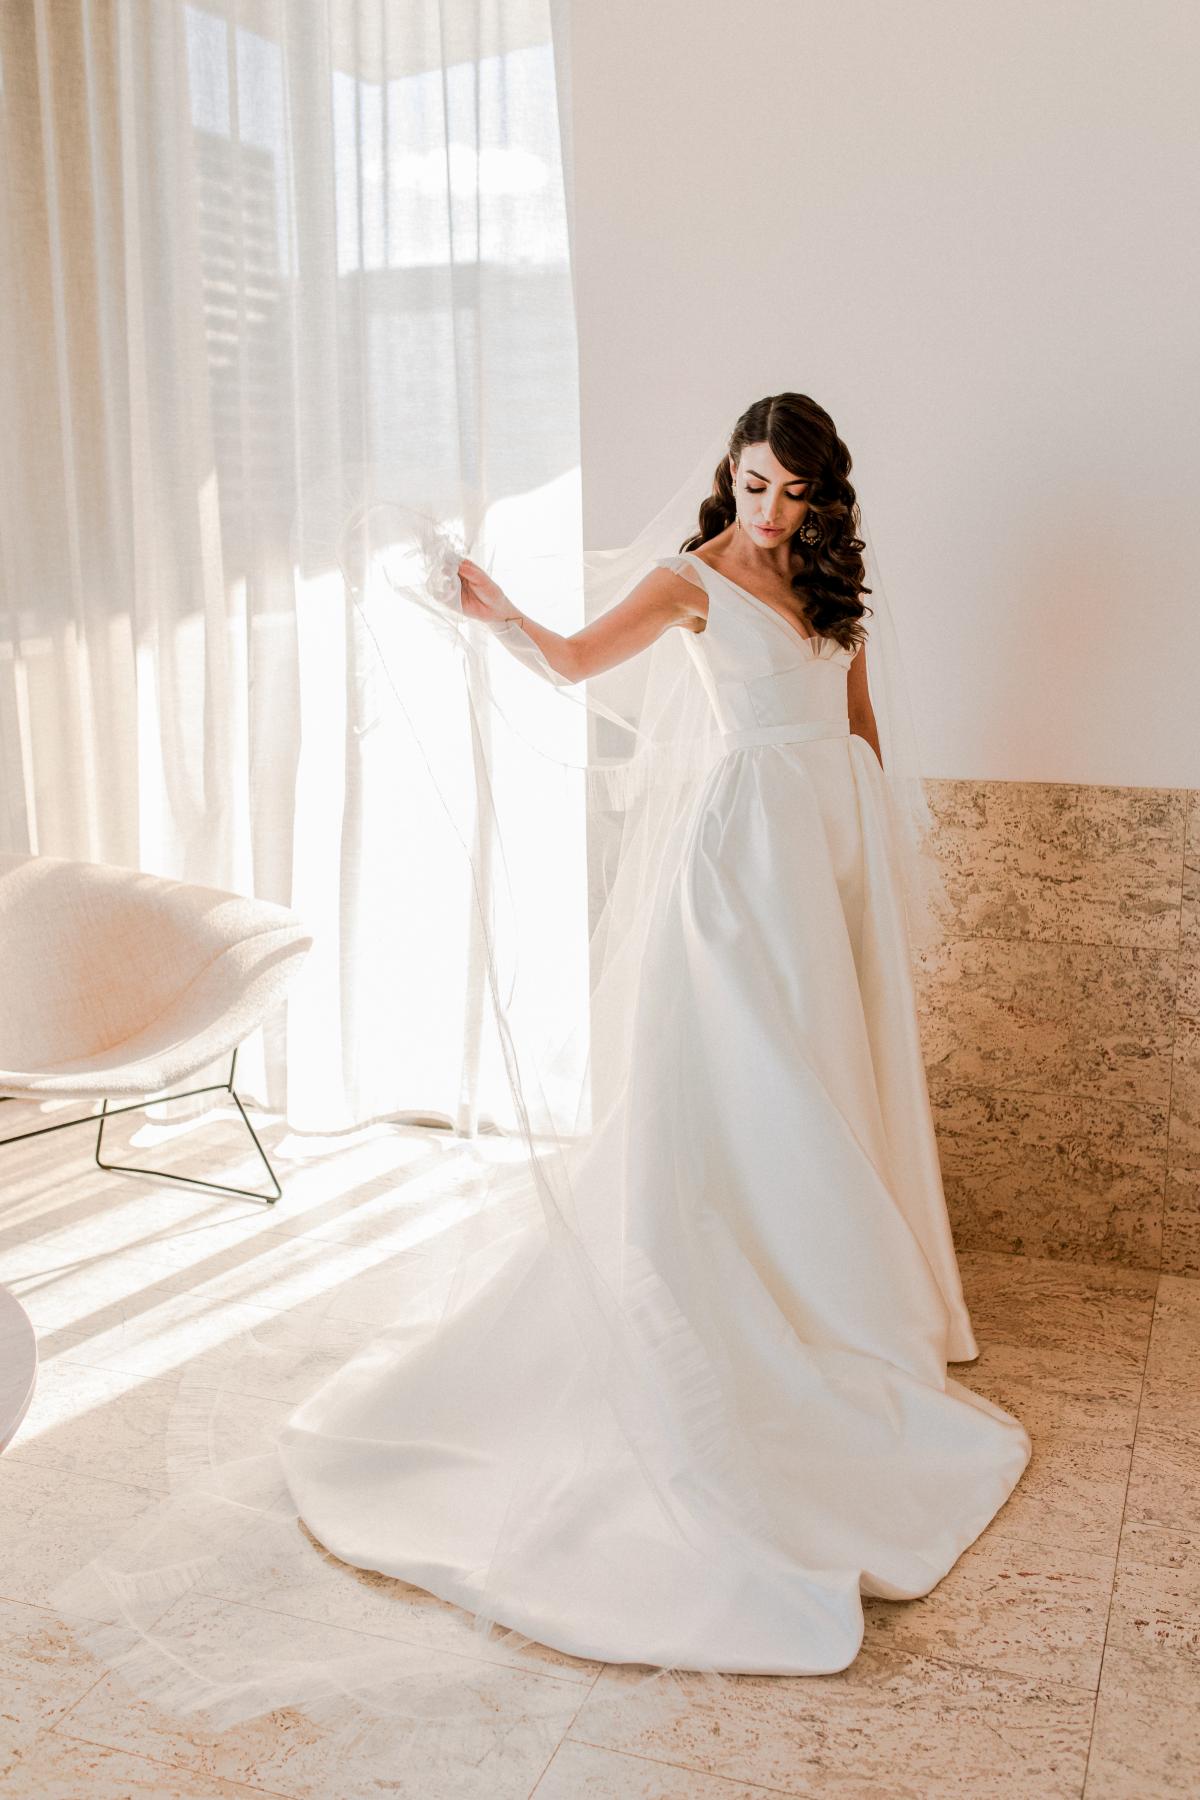 KWH real bride Josey struting in her Taryn Camille gown as she gets ready at The Calile Hotel. Taryn Camille is a voluminuous aline wedding dress with U-shaped wedding dress.